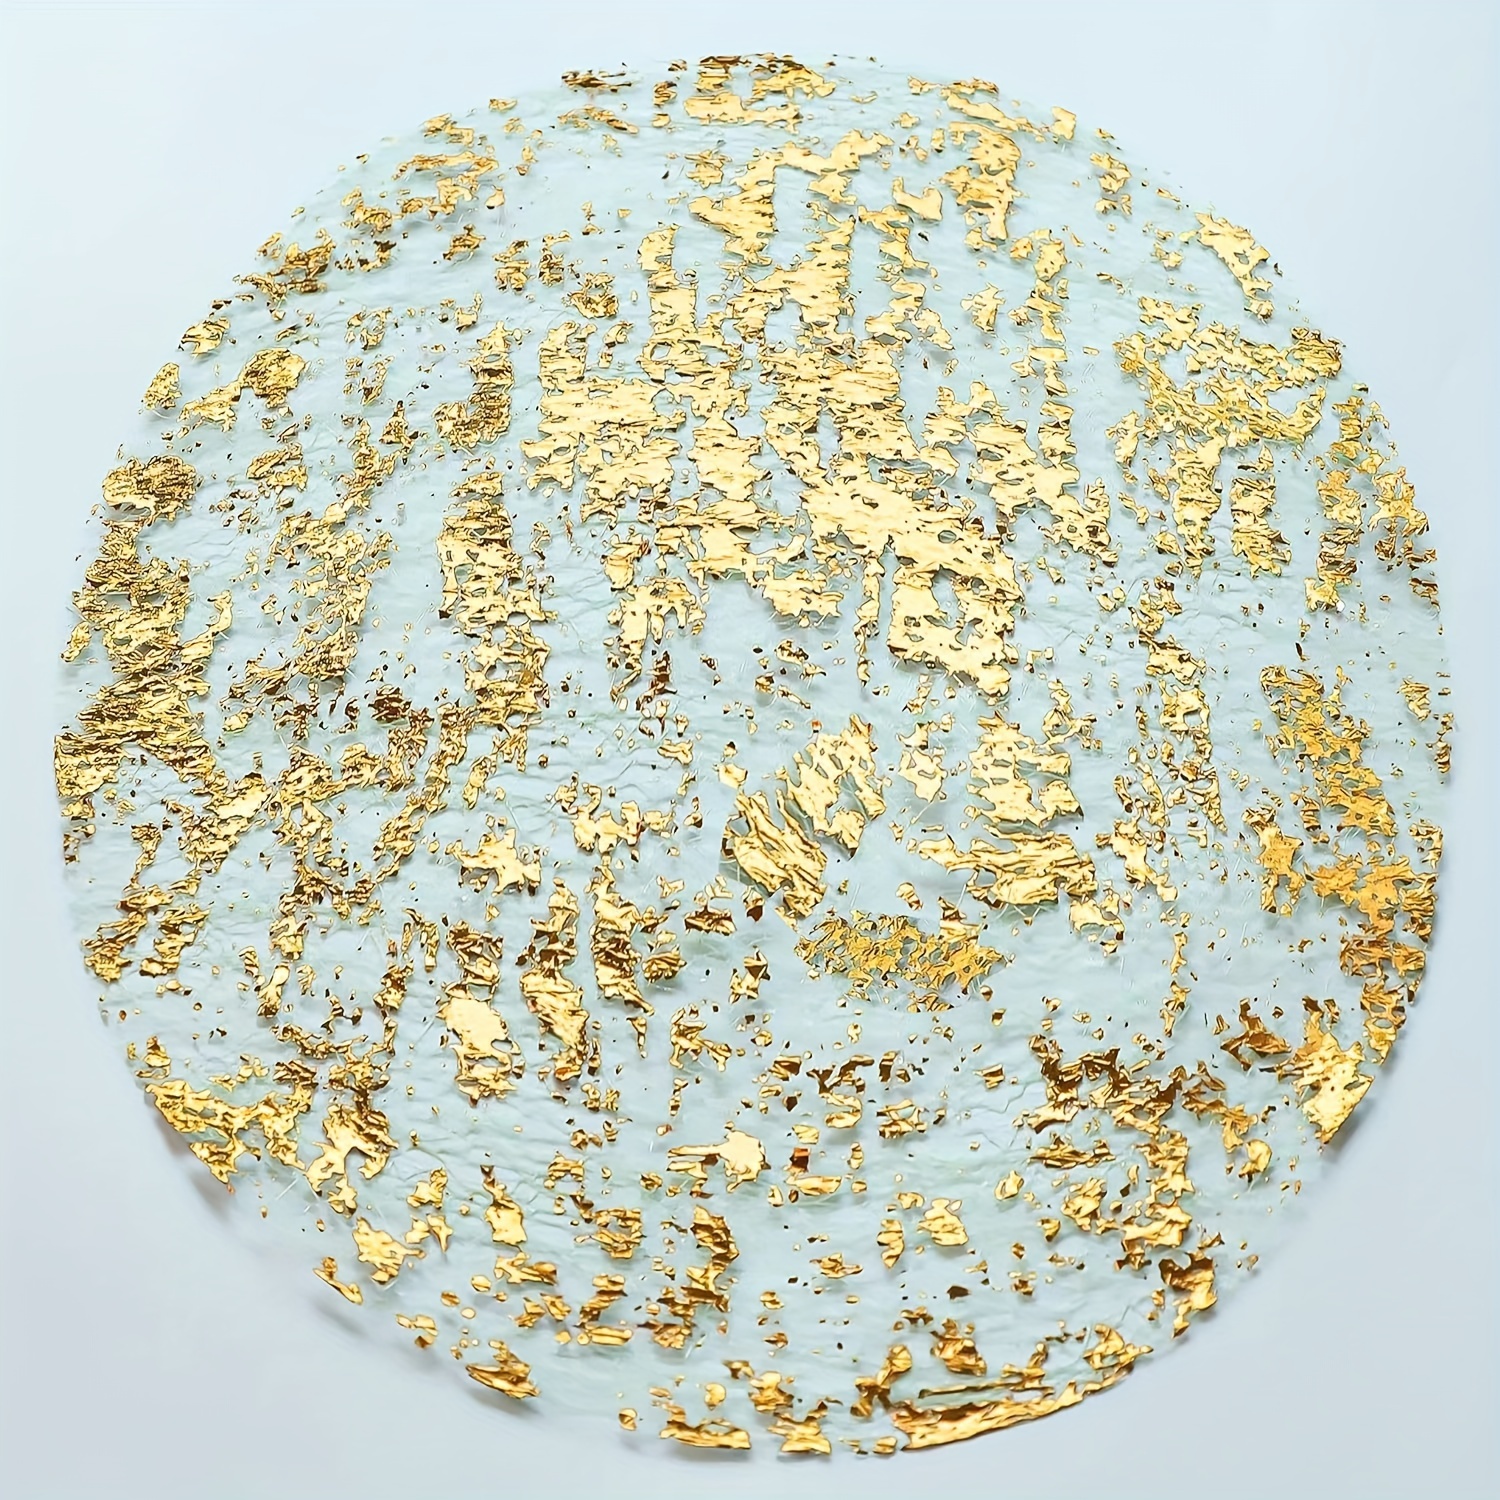 

100-pack Disposable Gold Placemats, Round Metallic Gold Foil Pressed Table Mats For Party Decoration, Restaurant, Hotel, And Wedding Reception - Machine Made Polyester Material